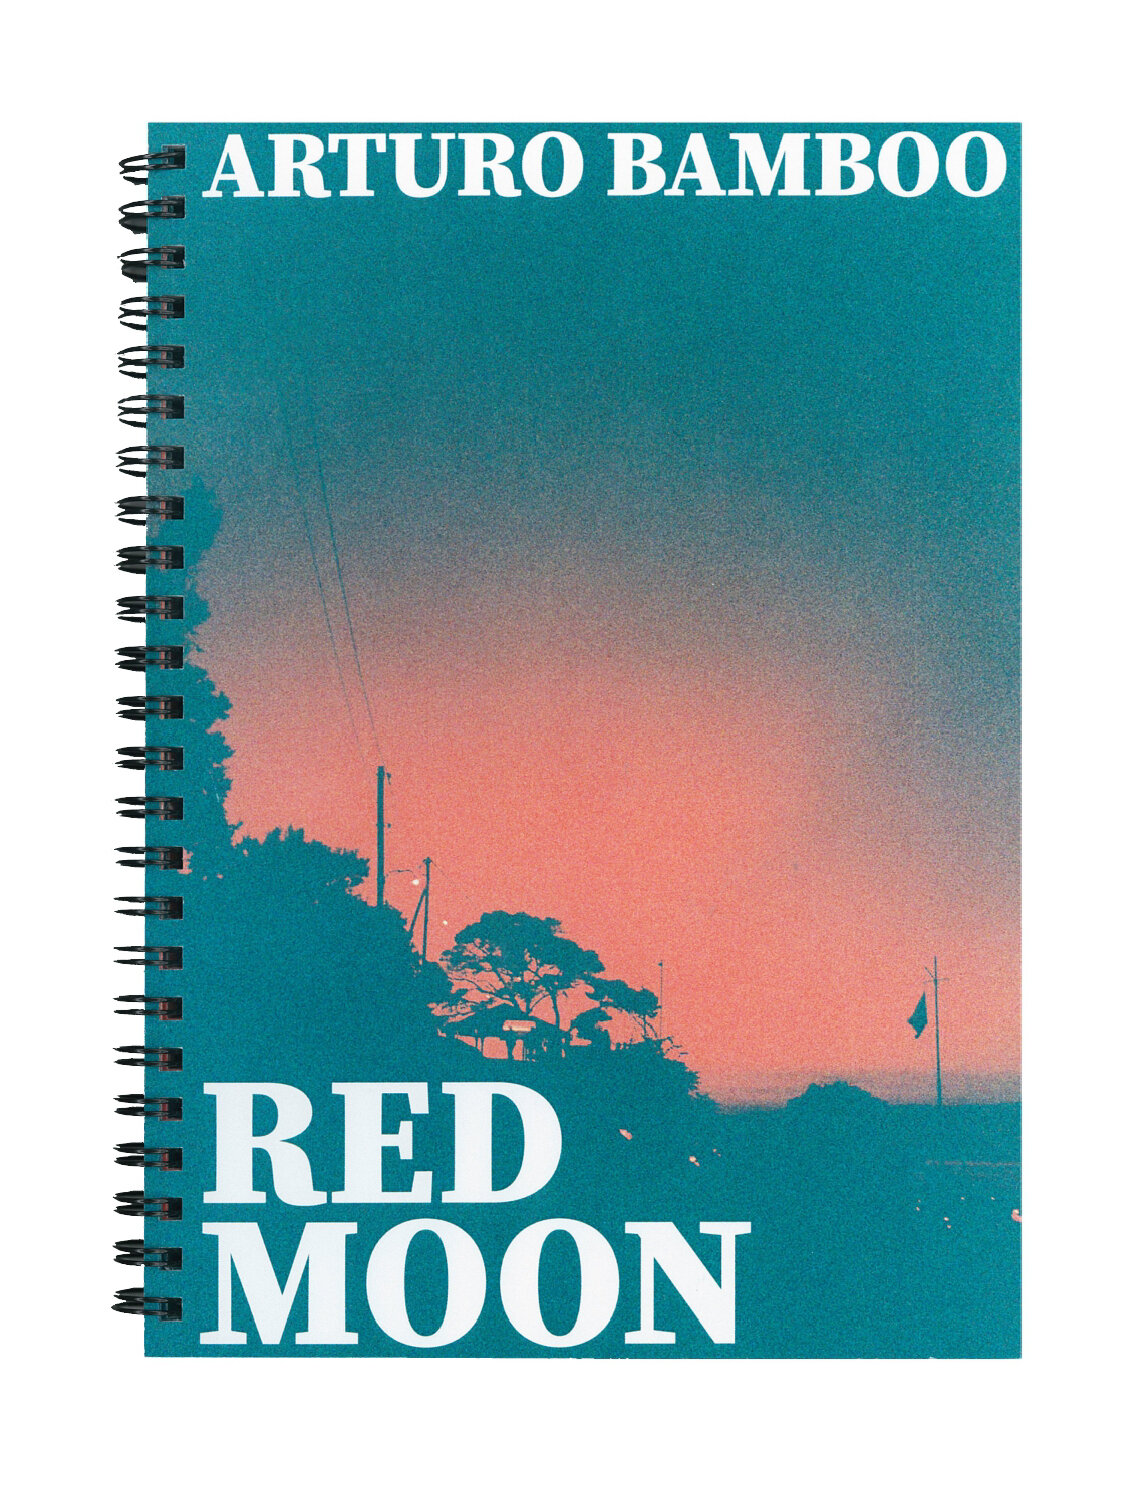  RED MOON ACTS AS A PERSONAL ALBUM OF DREAM-LIKE MEMORIES AND FEELS LIKE SOMETHING BETWEEN AN UTOPIA AND A DYSTOPIA. THE PUBLICATION WAS SHOT ON A REVERSE-ROLLED COLOR NEGATIVE FILM TO EMPHASISE THE RAW BEAUTY OF THE SUBJECTS  21X15CM, 20 PAGES, RING